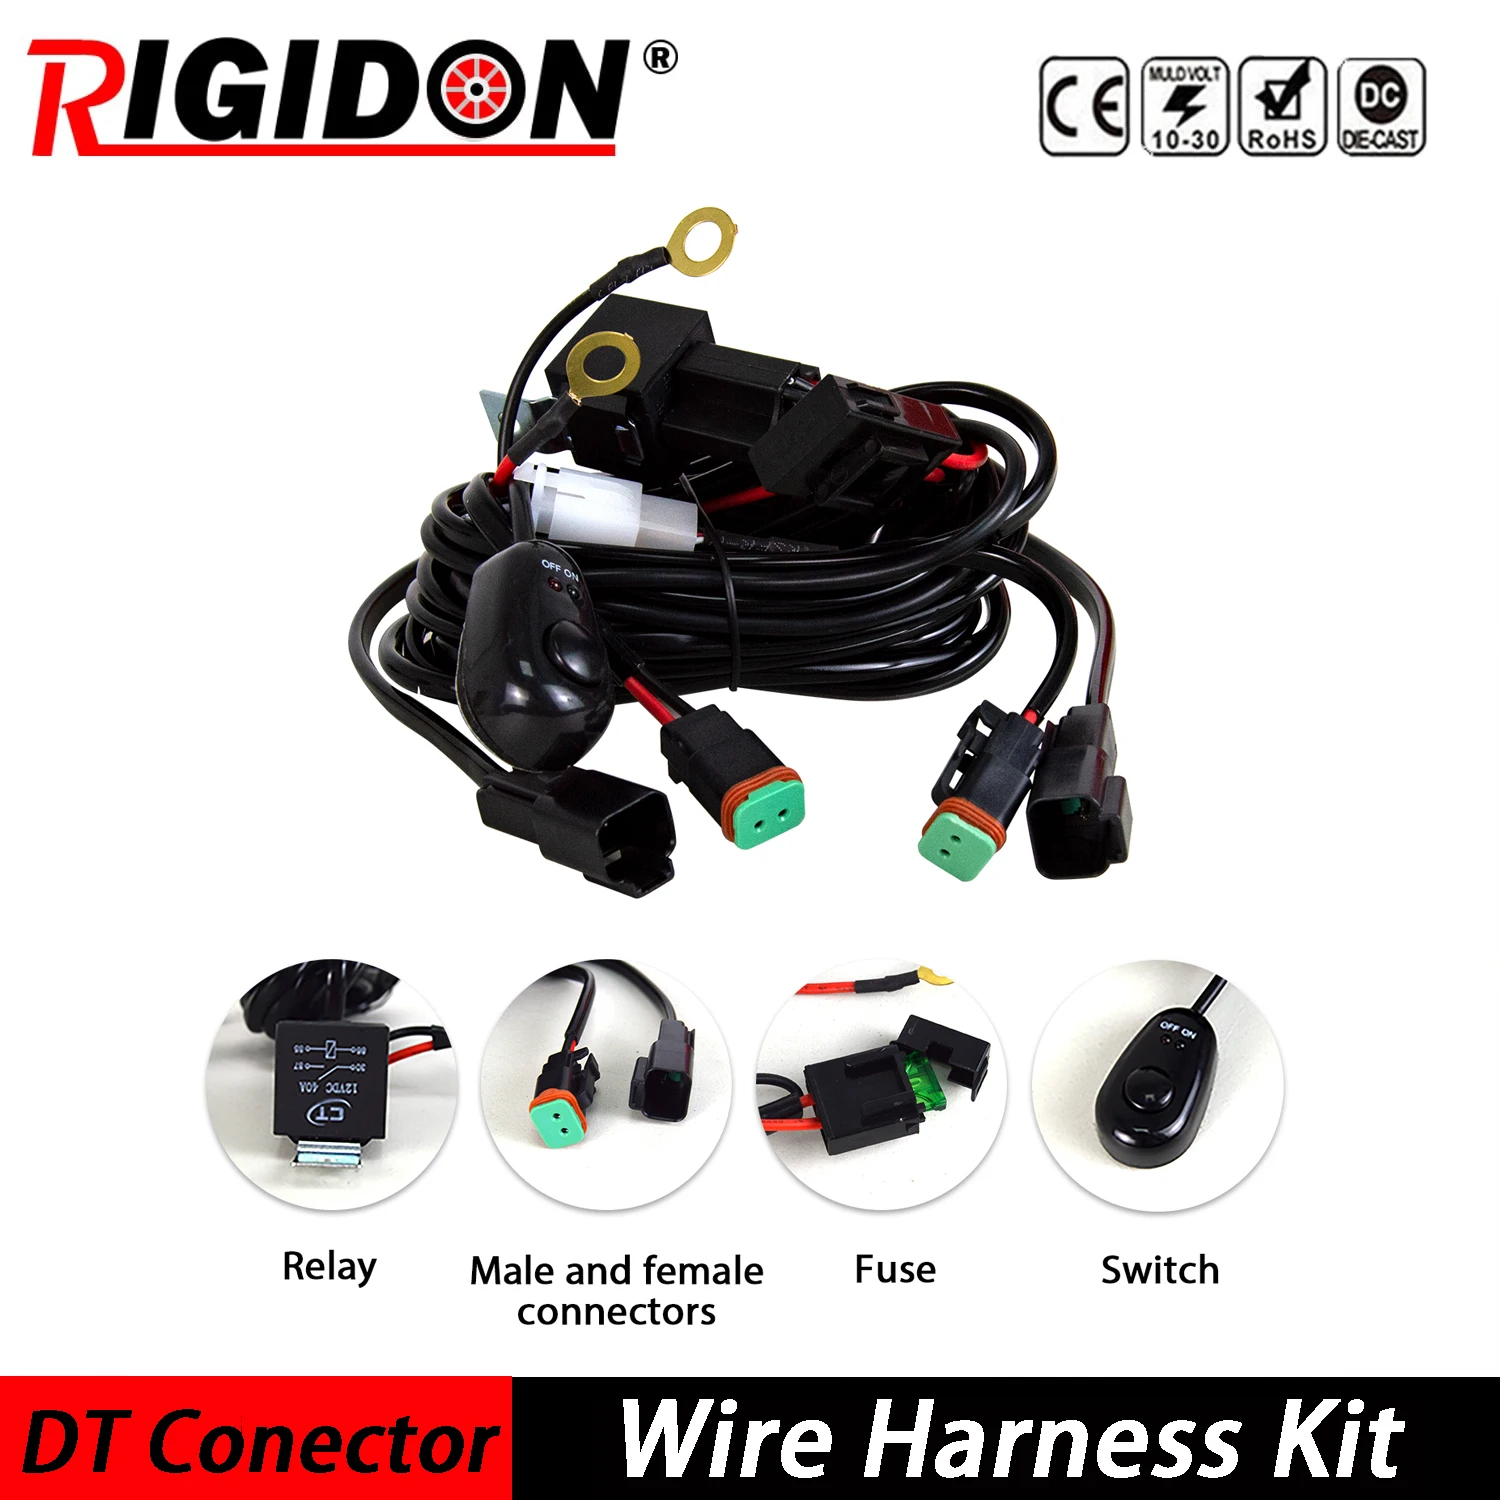 

RIGIDON 1 2 4 Lead 12V 40A LED Work Light Bar Wiring Harness Kit Offroad 4x4 Truck SUV Cable Rocker Black Switch Relay Fuse